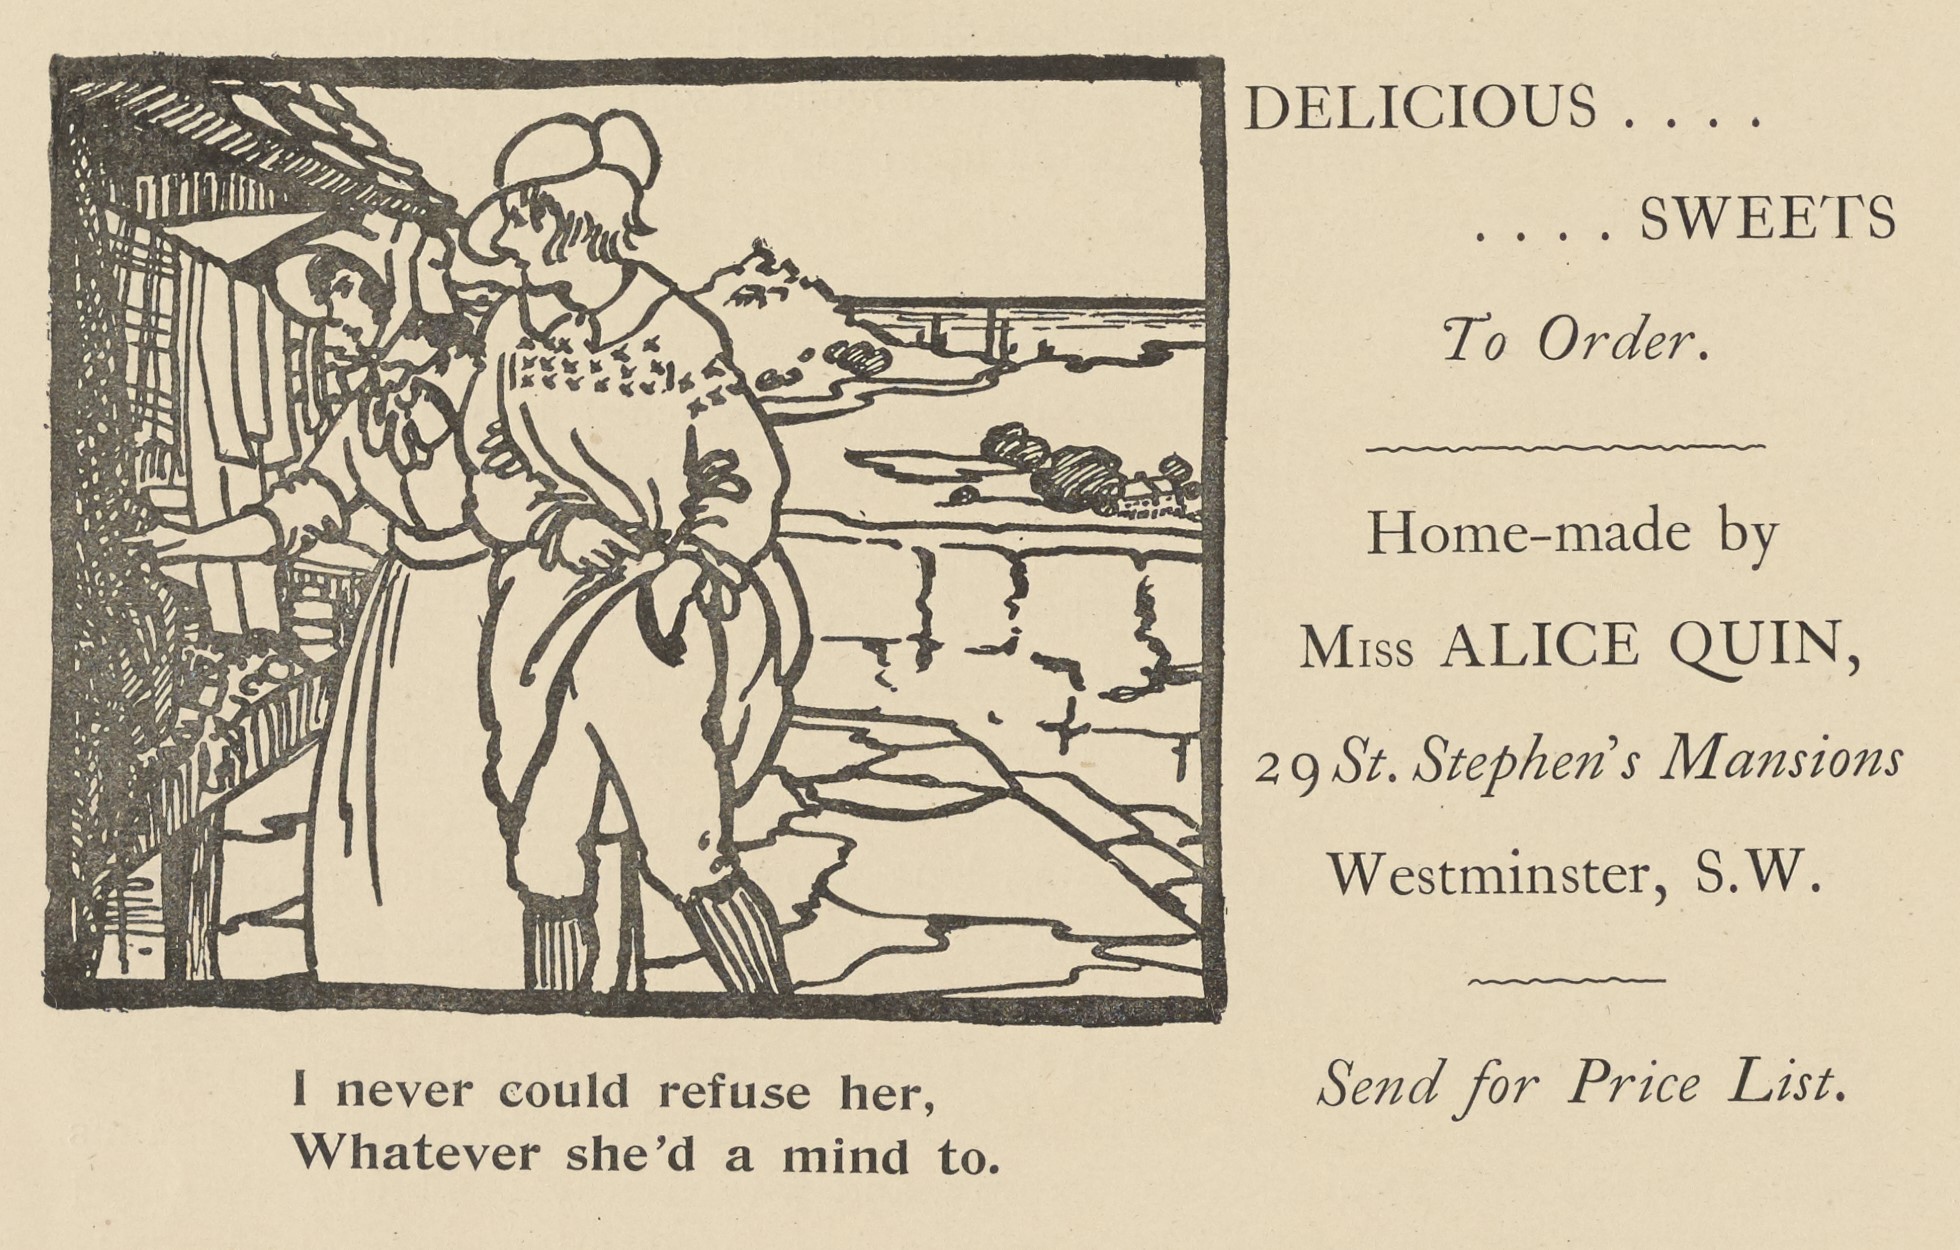 The pen-and-ink illustrated advertisement is outlined with a thick black rectangular border, to the left of the text advertisements In it, a young couple with arms linked stops along a street at a shop, facing left in three-quarter profile. The woman, wearing a ribboned bonnet and dress, is touching a bolt of cloth outside a shop. The man, wearing a long tunic atop breeches and high socks, reaches his hand into pocket. Behind them, a stone wall separates the figures from a field dotted with trees and a small house. In the background, the sea recedes into the horizon. The artist’s monogram is in the bottom left corner of the frame.